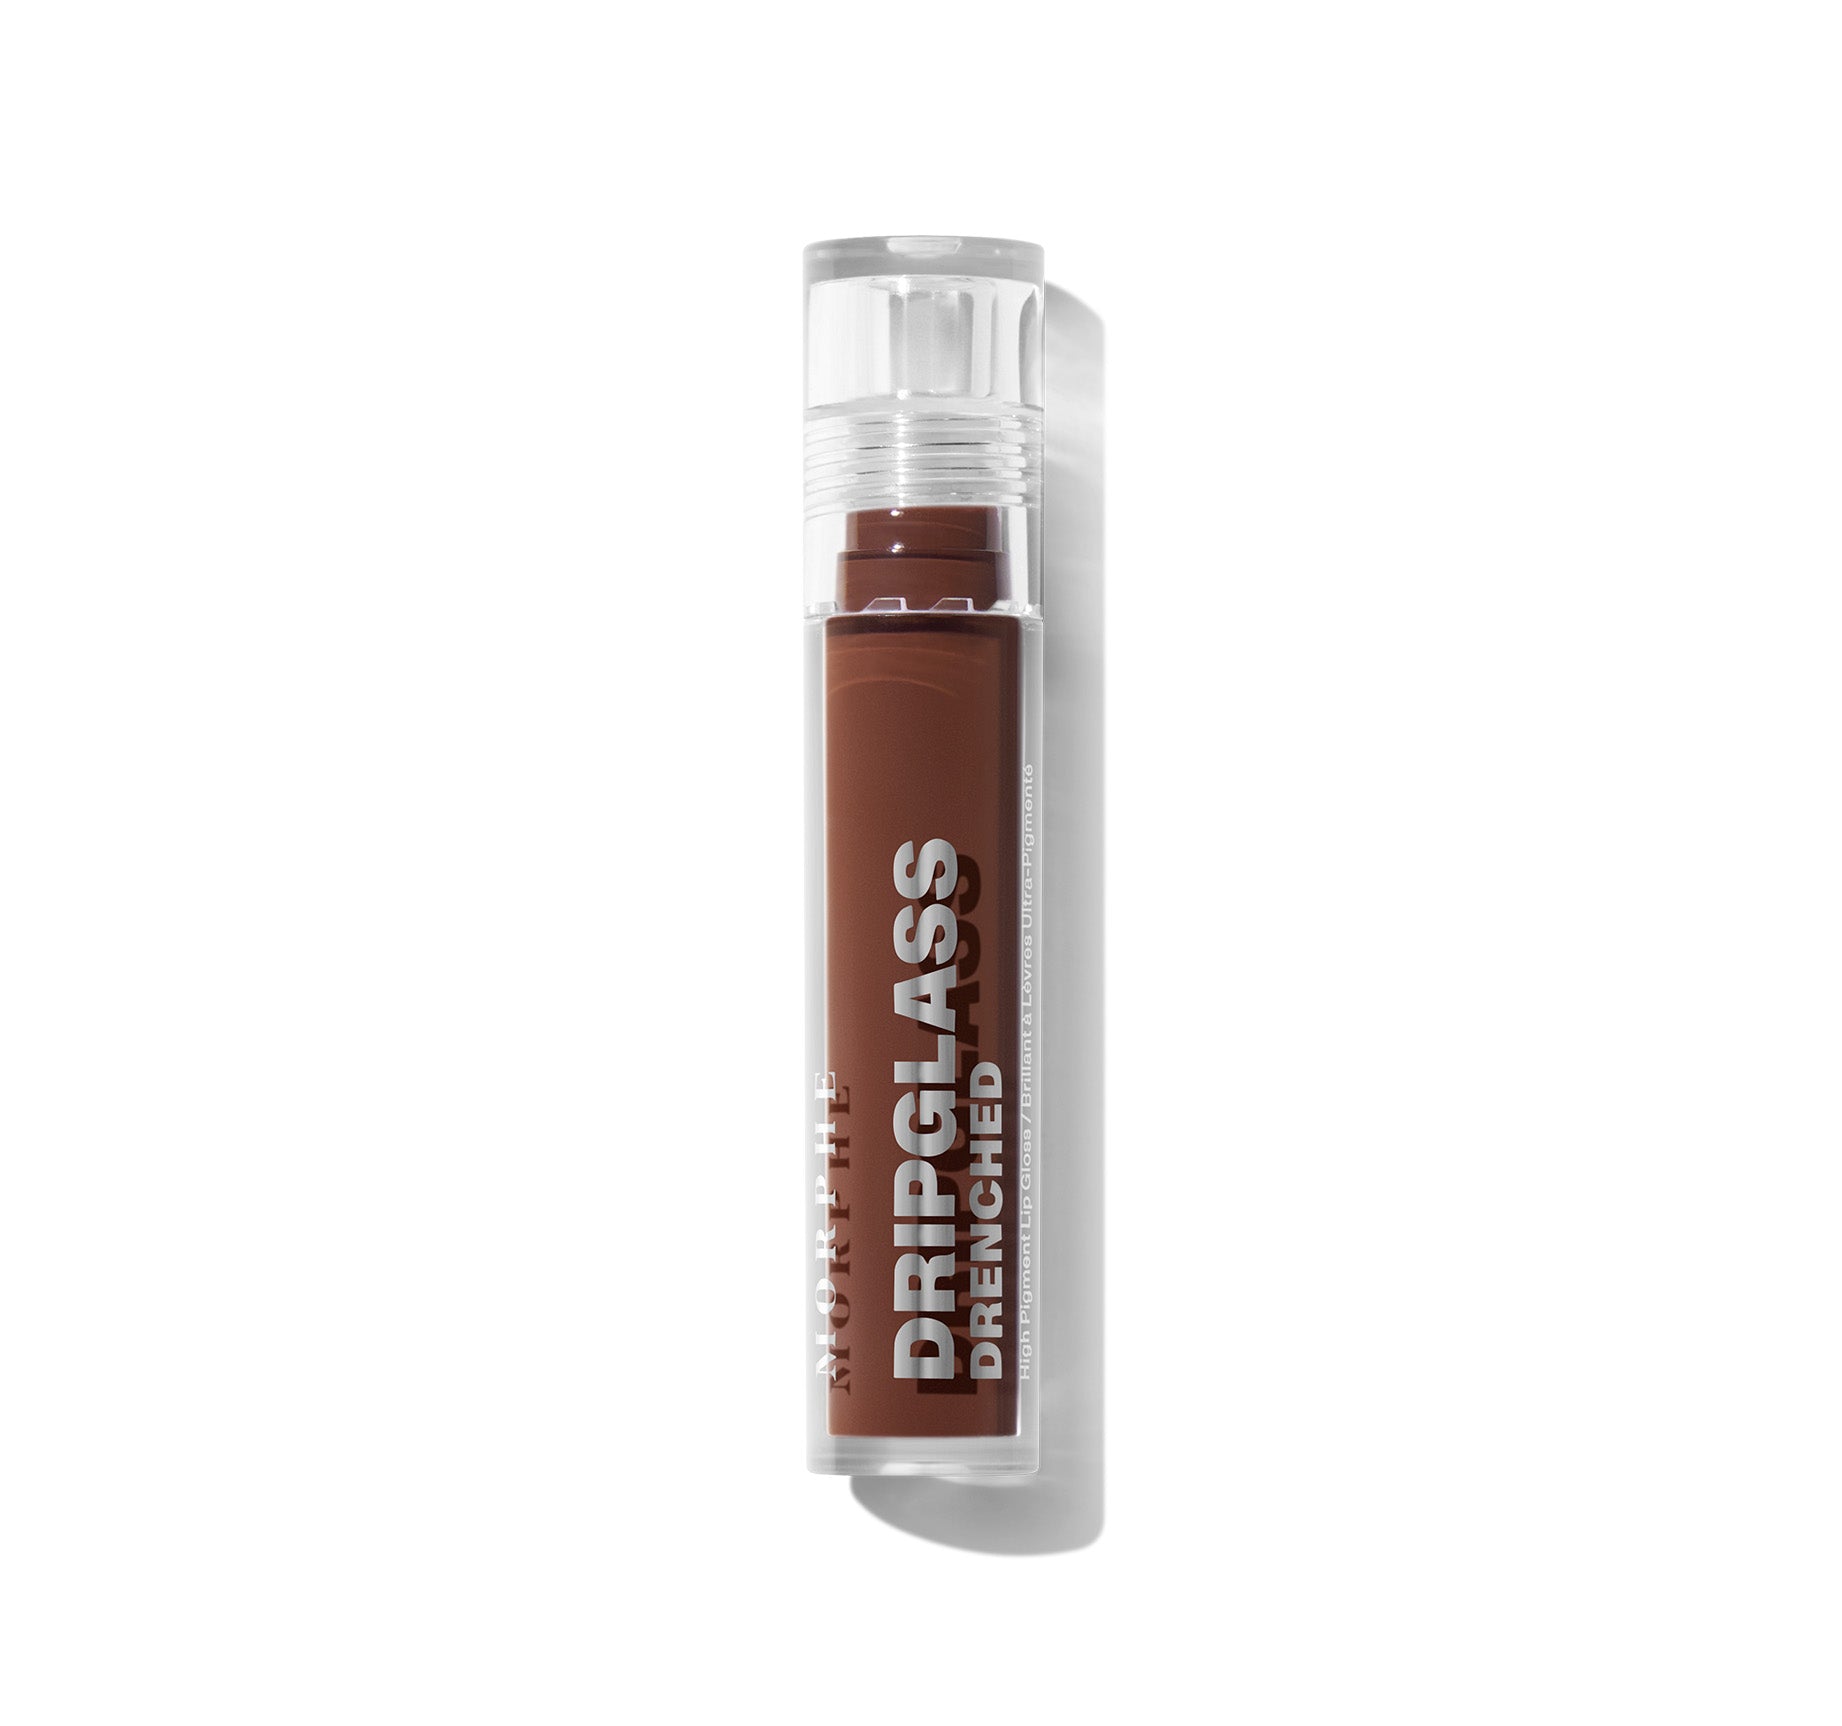 Dripglass Drenched High Pigment Lip Gloss - Cocoa Melt - Image 5